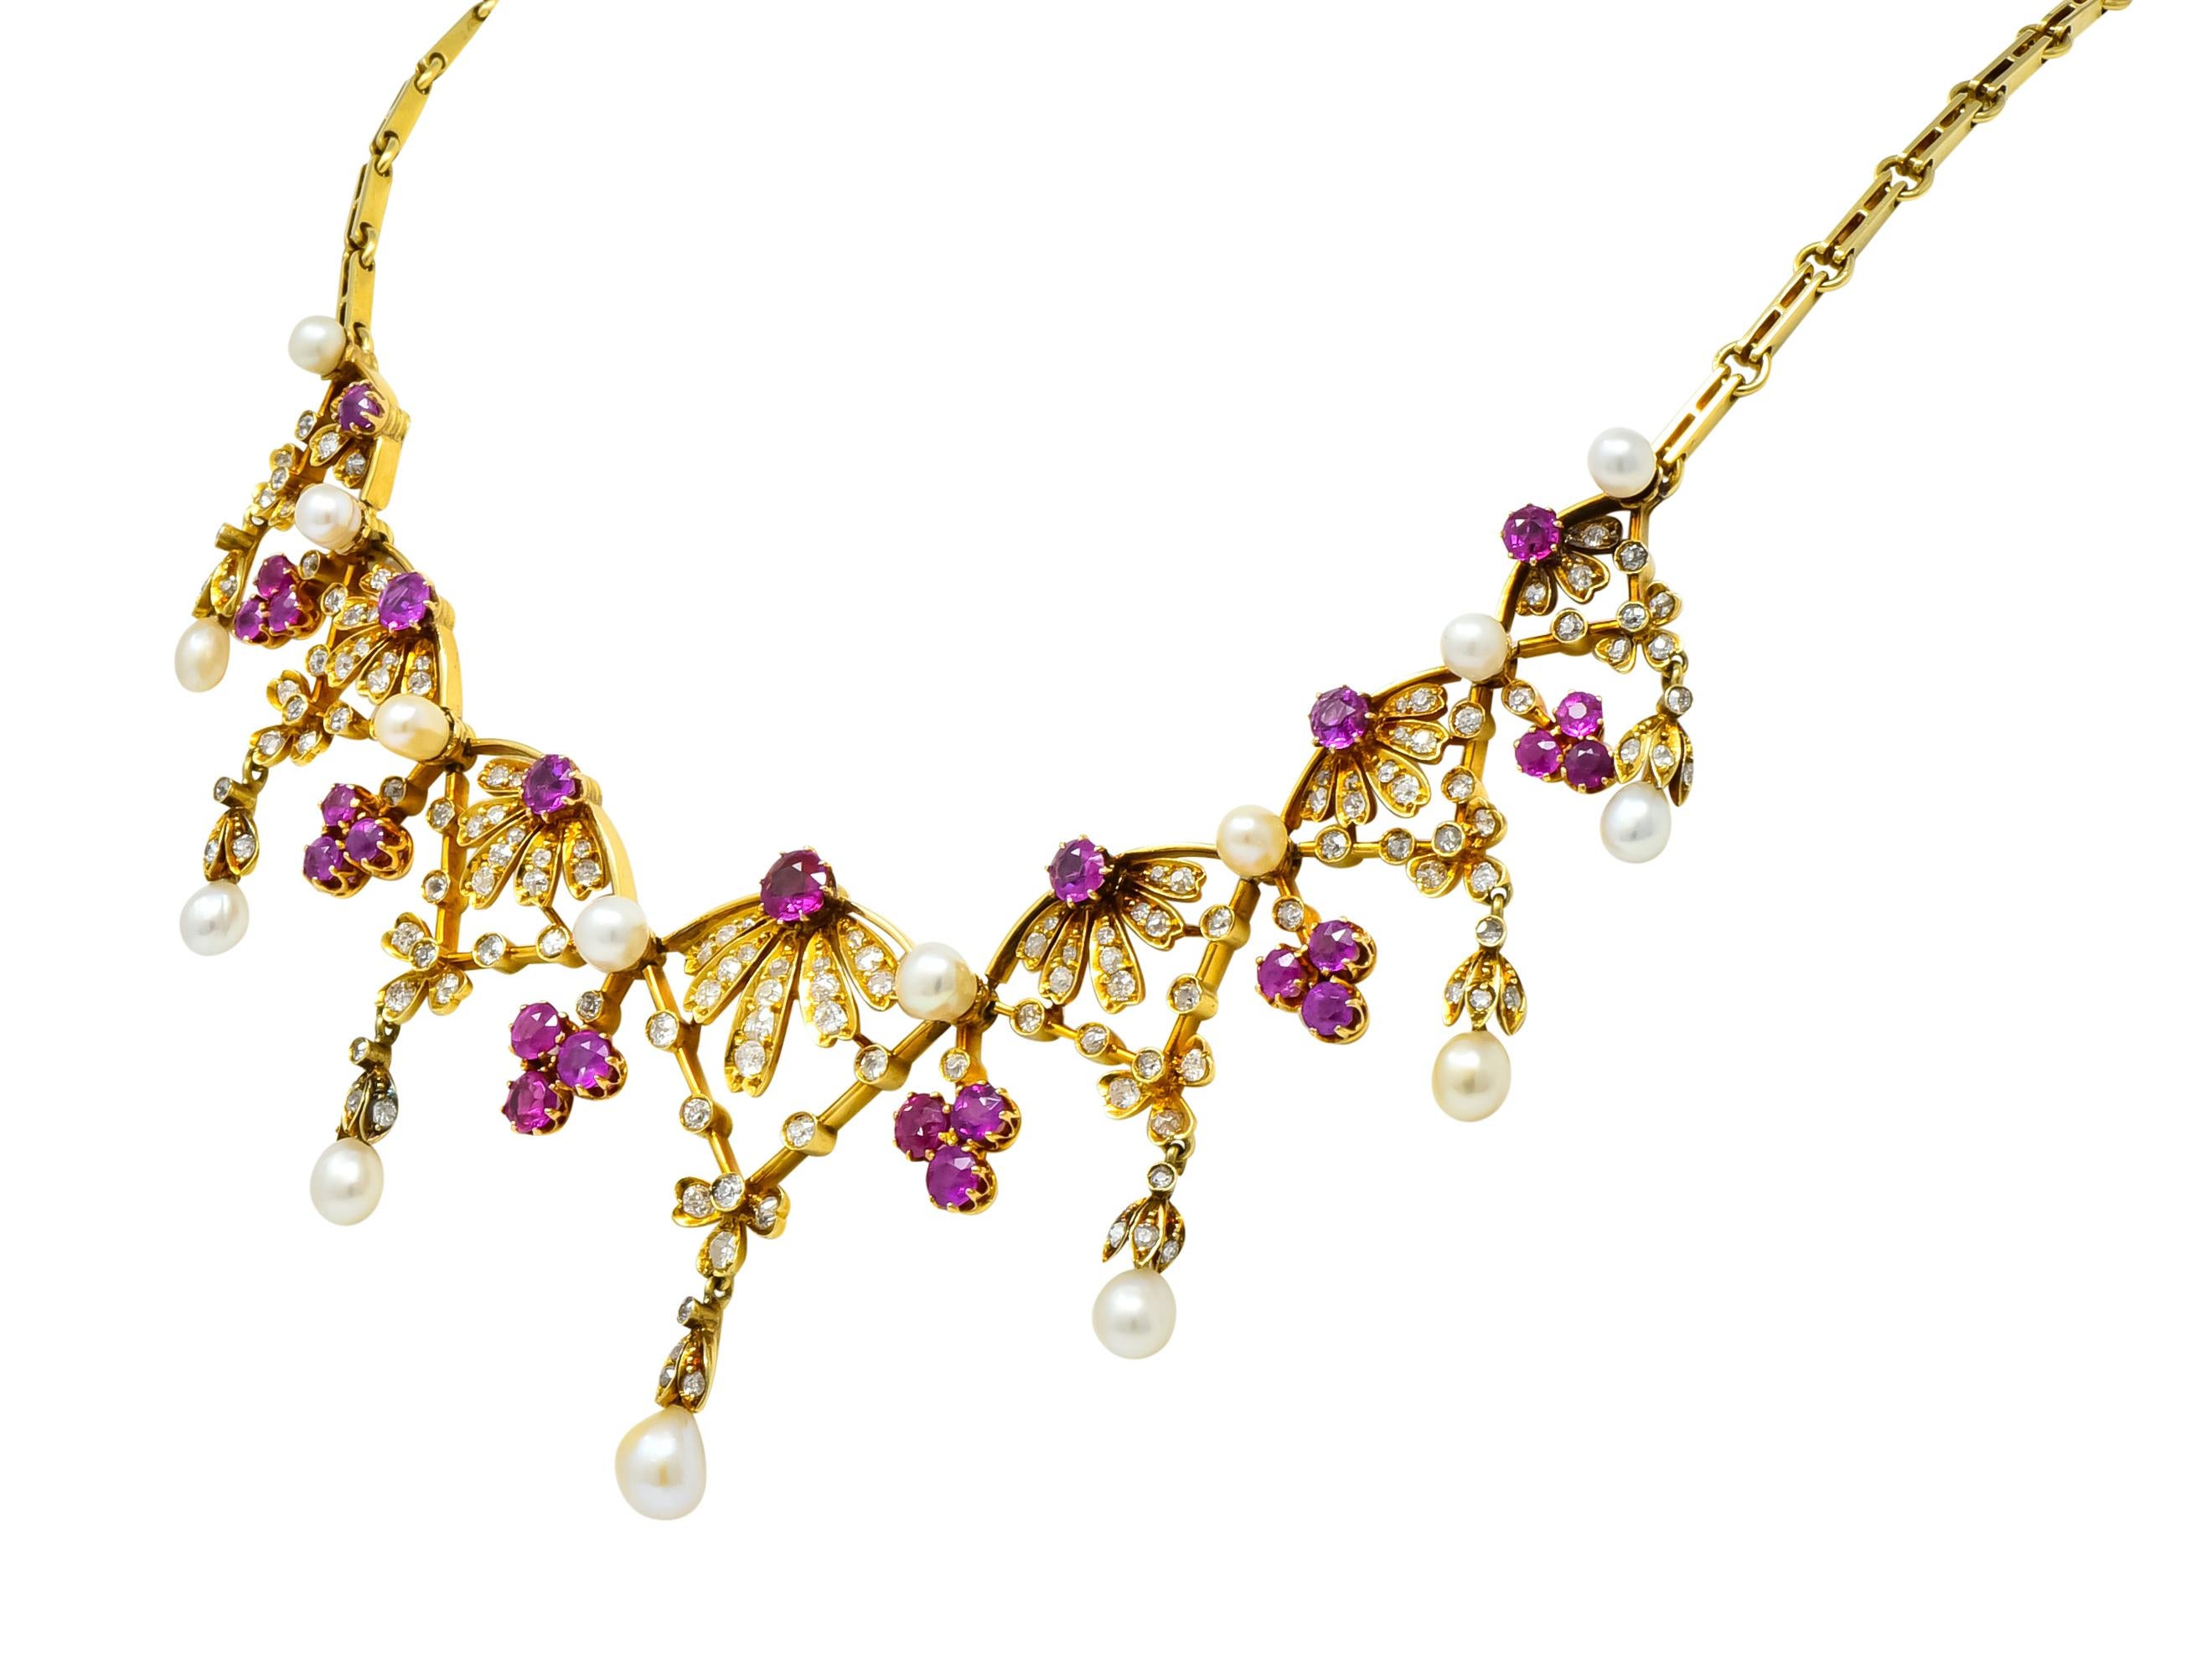 Necklace designed as seven floral stations with bow motif and articulated floral drops

Drops and stations accented by natural freshwater pearls, varying in shape and size, cream in body color with very good luster

With prong set round cut rubies,